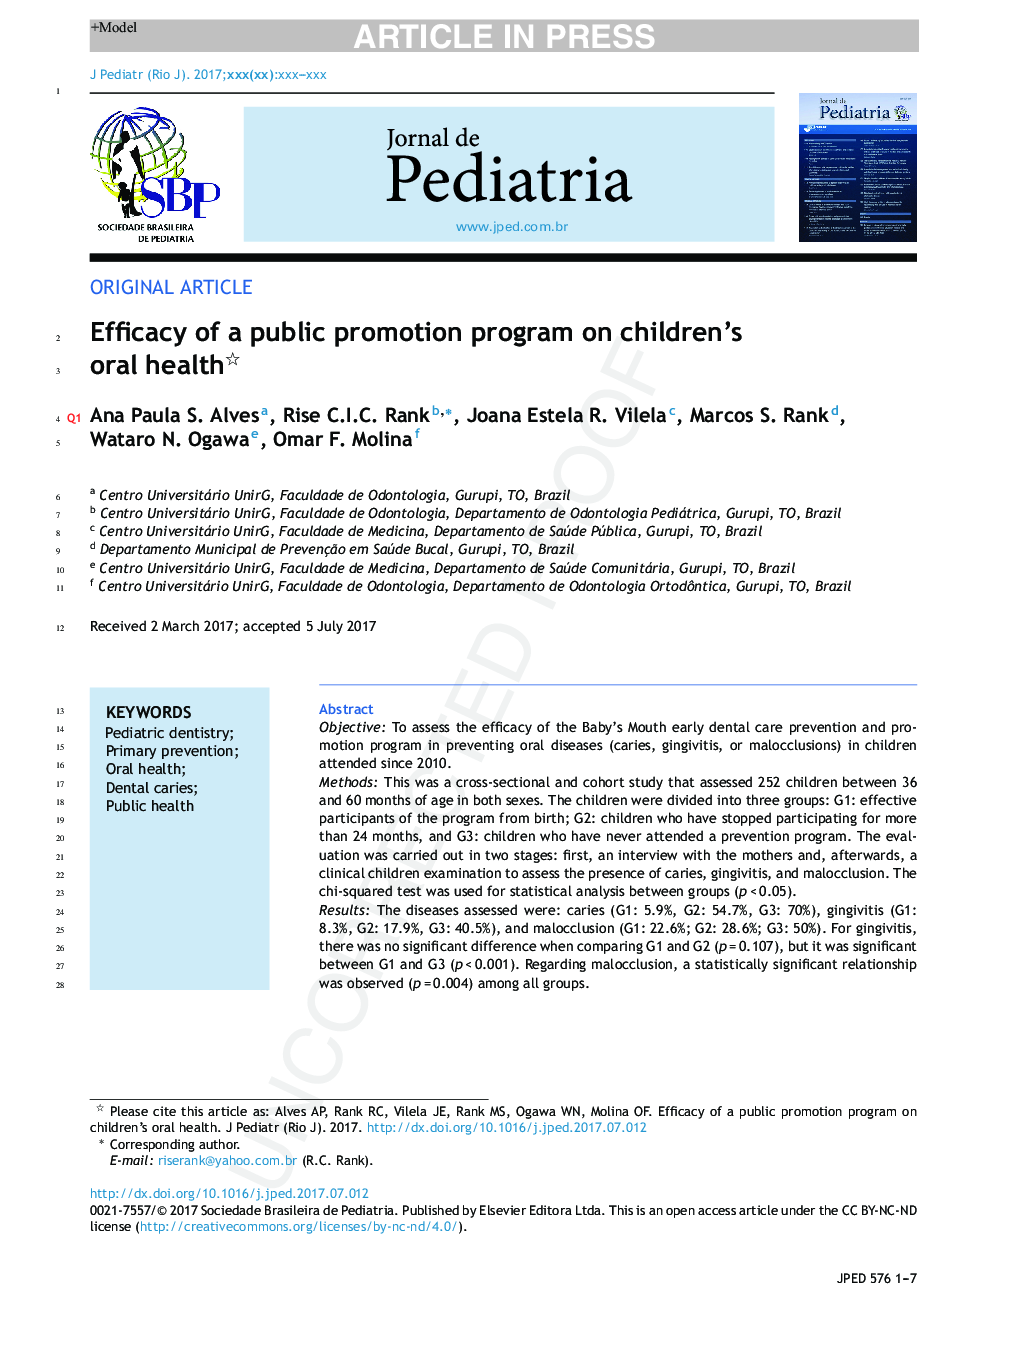 Efficacy of a public promotion program on children's oral health